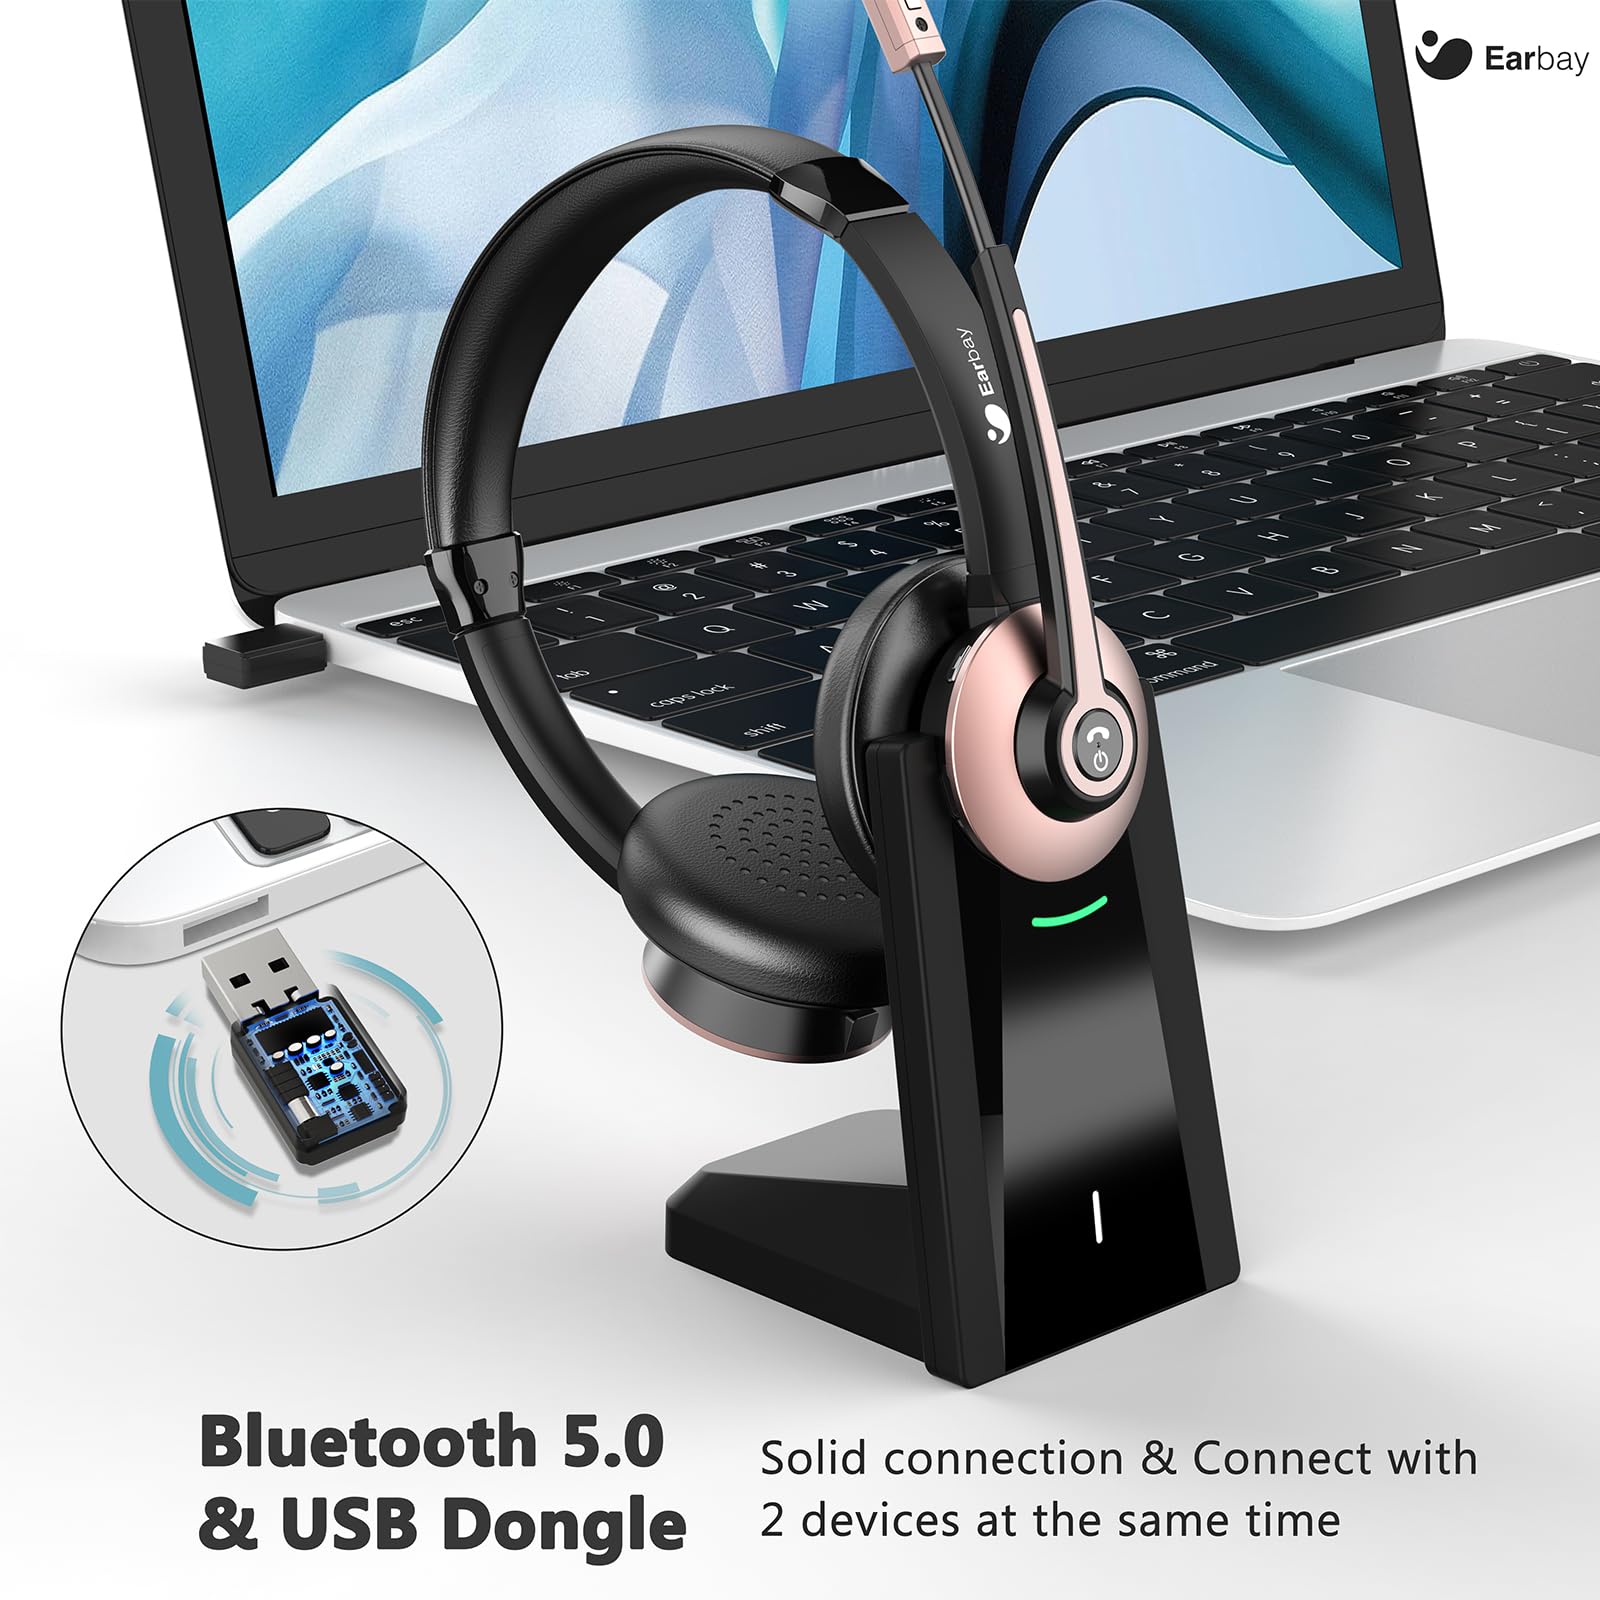 Earbay Rose Gold Bluetooth Headset with Microphone, USB Dongle Charging Dock BT786-CD